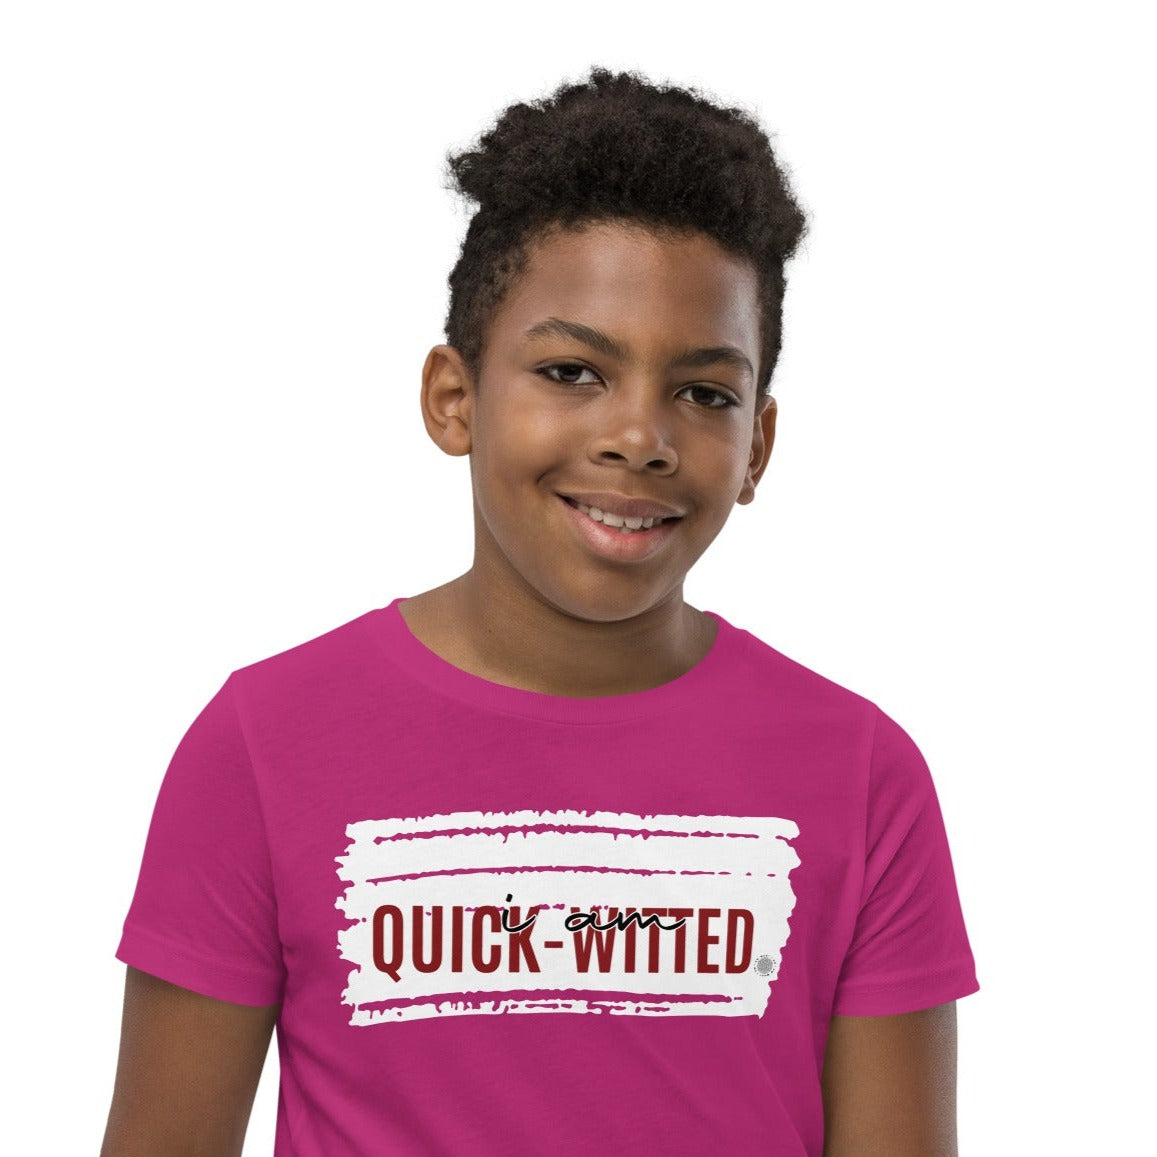 I Am Quick-witted Youth T-Shirt berry